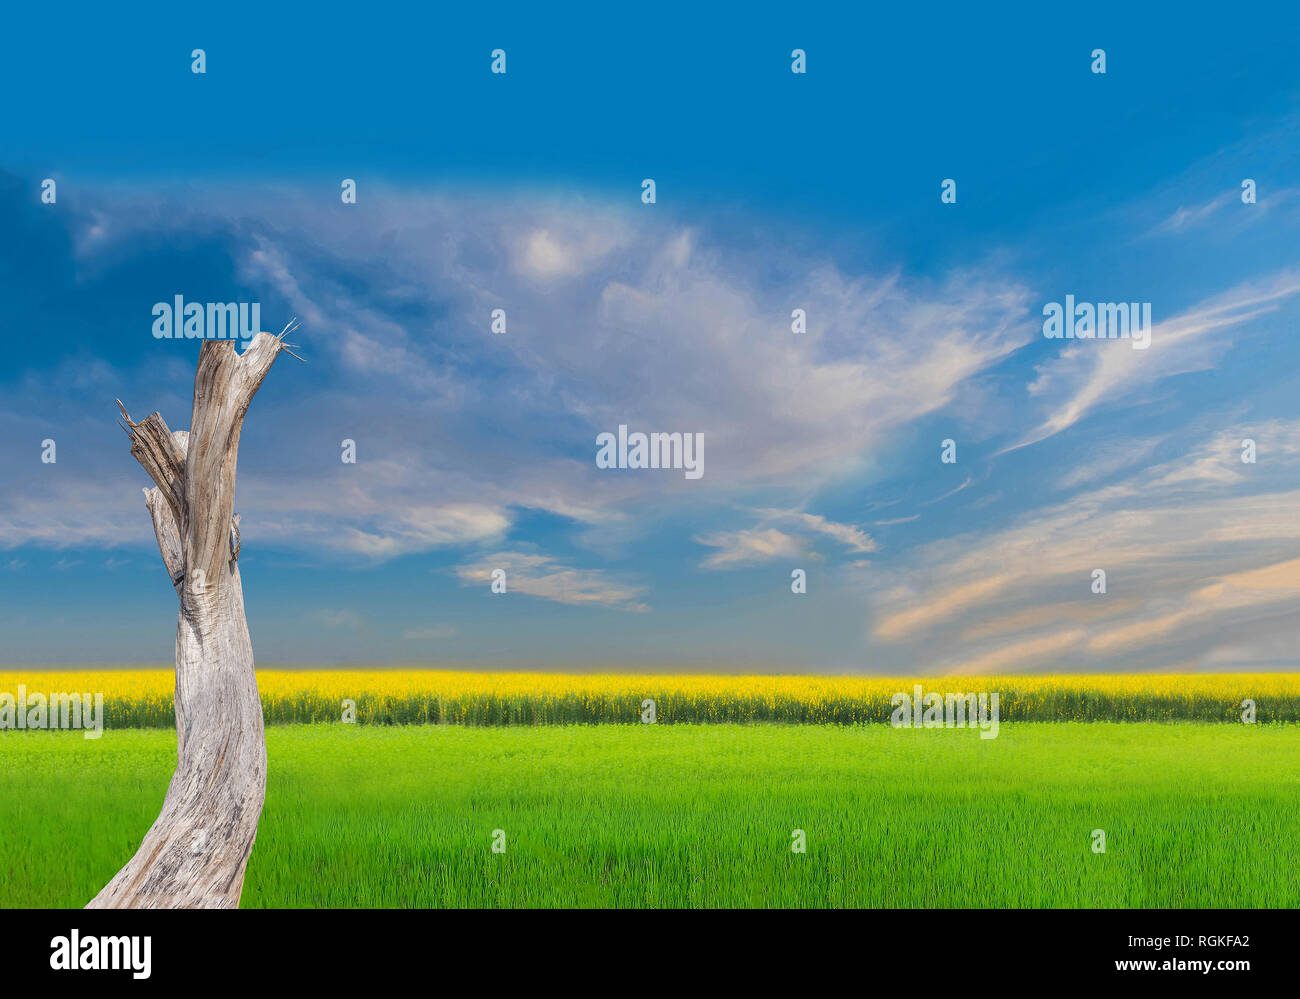 Abstract the branches of the dead tree, green paddy rice field, yellow plant field with the beautiful sky and cloud background. Stock Photo